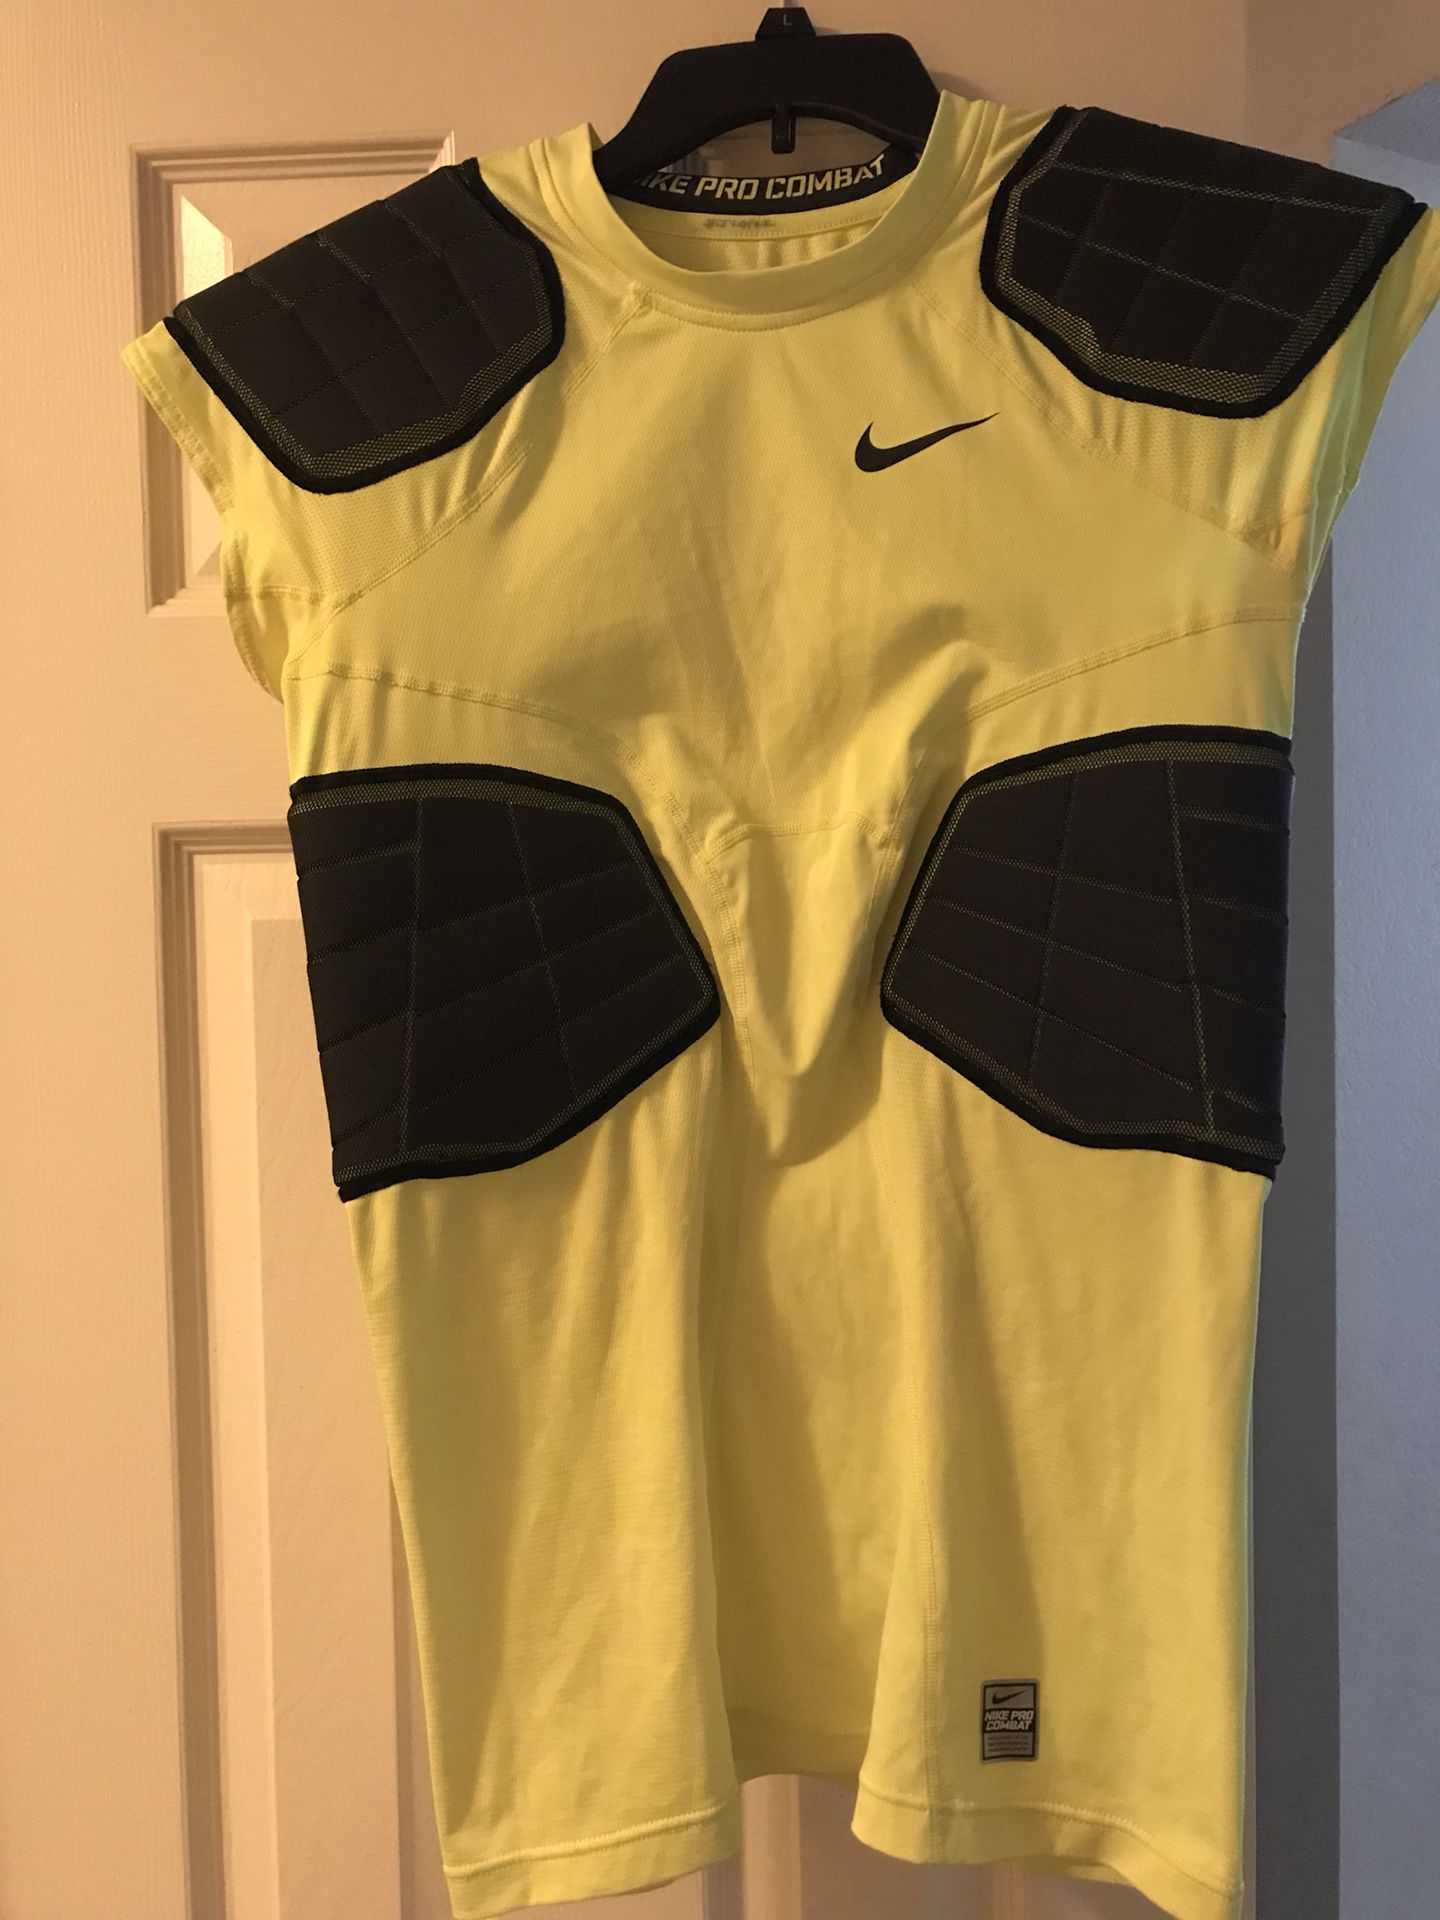 remaining compensate Religious Nike Pro Combat Football Shirt for Sale in Upland, CA - OfferUp